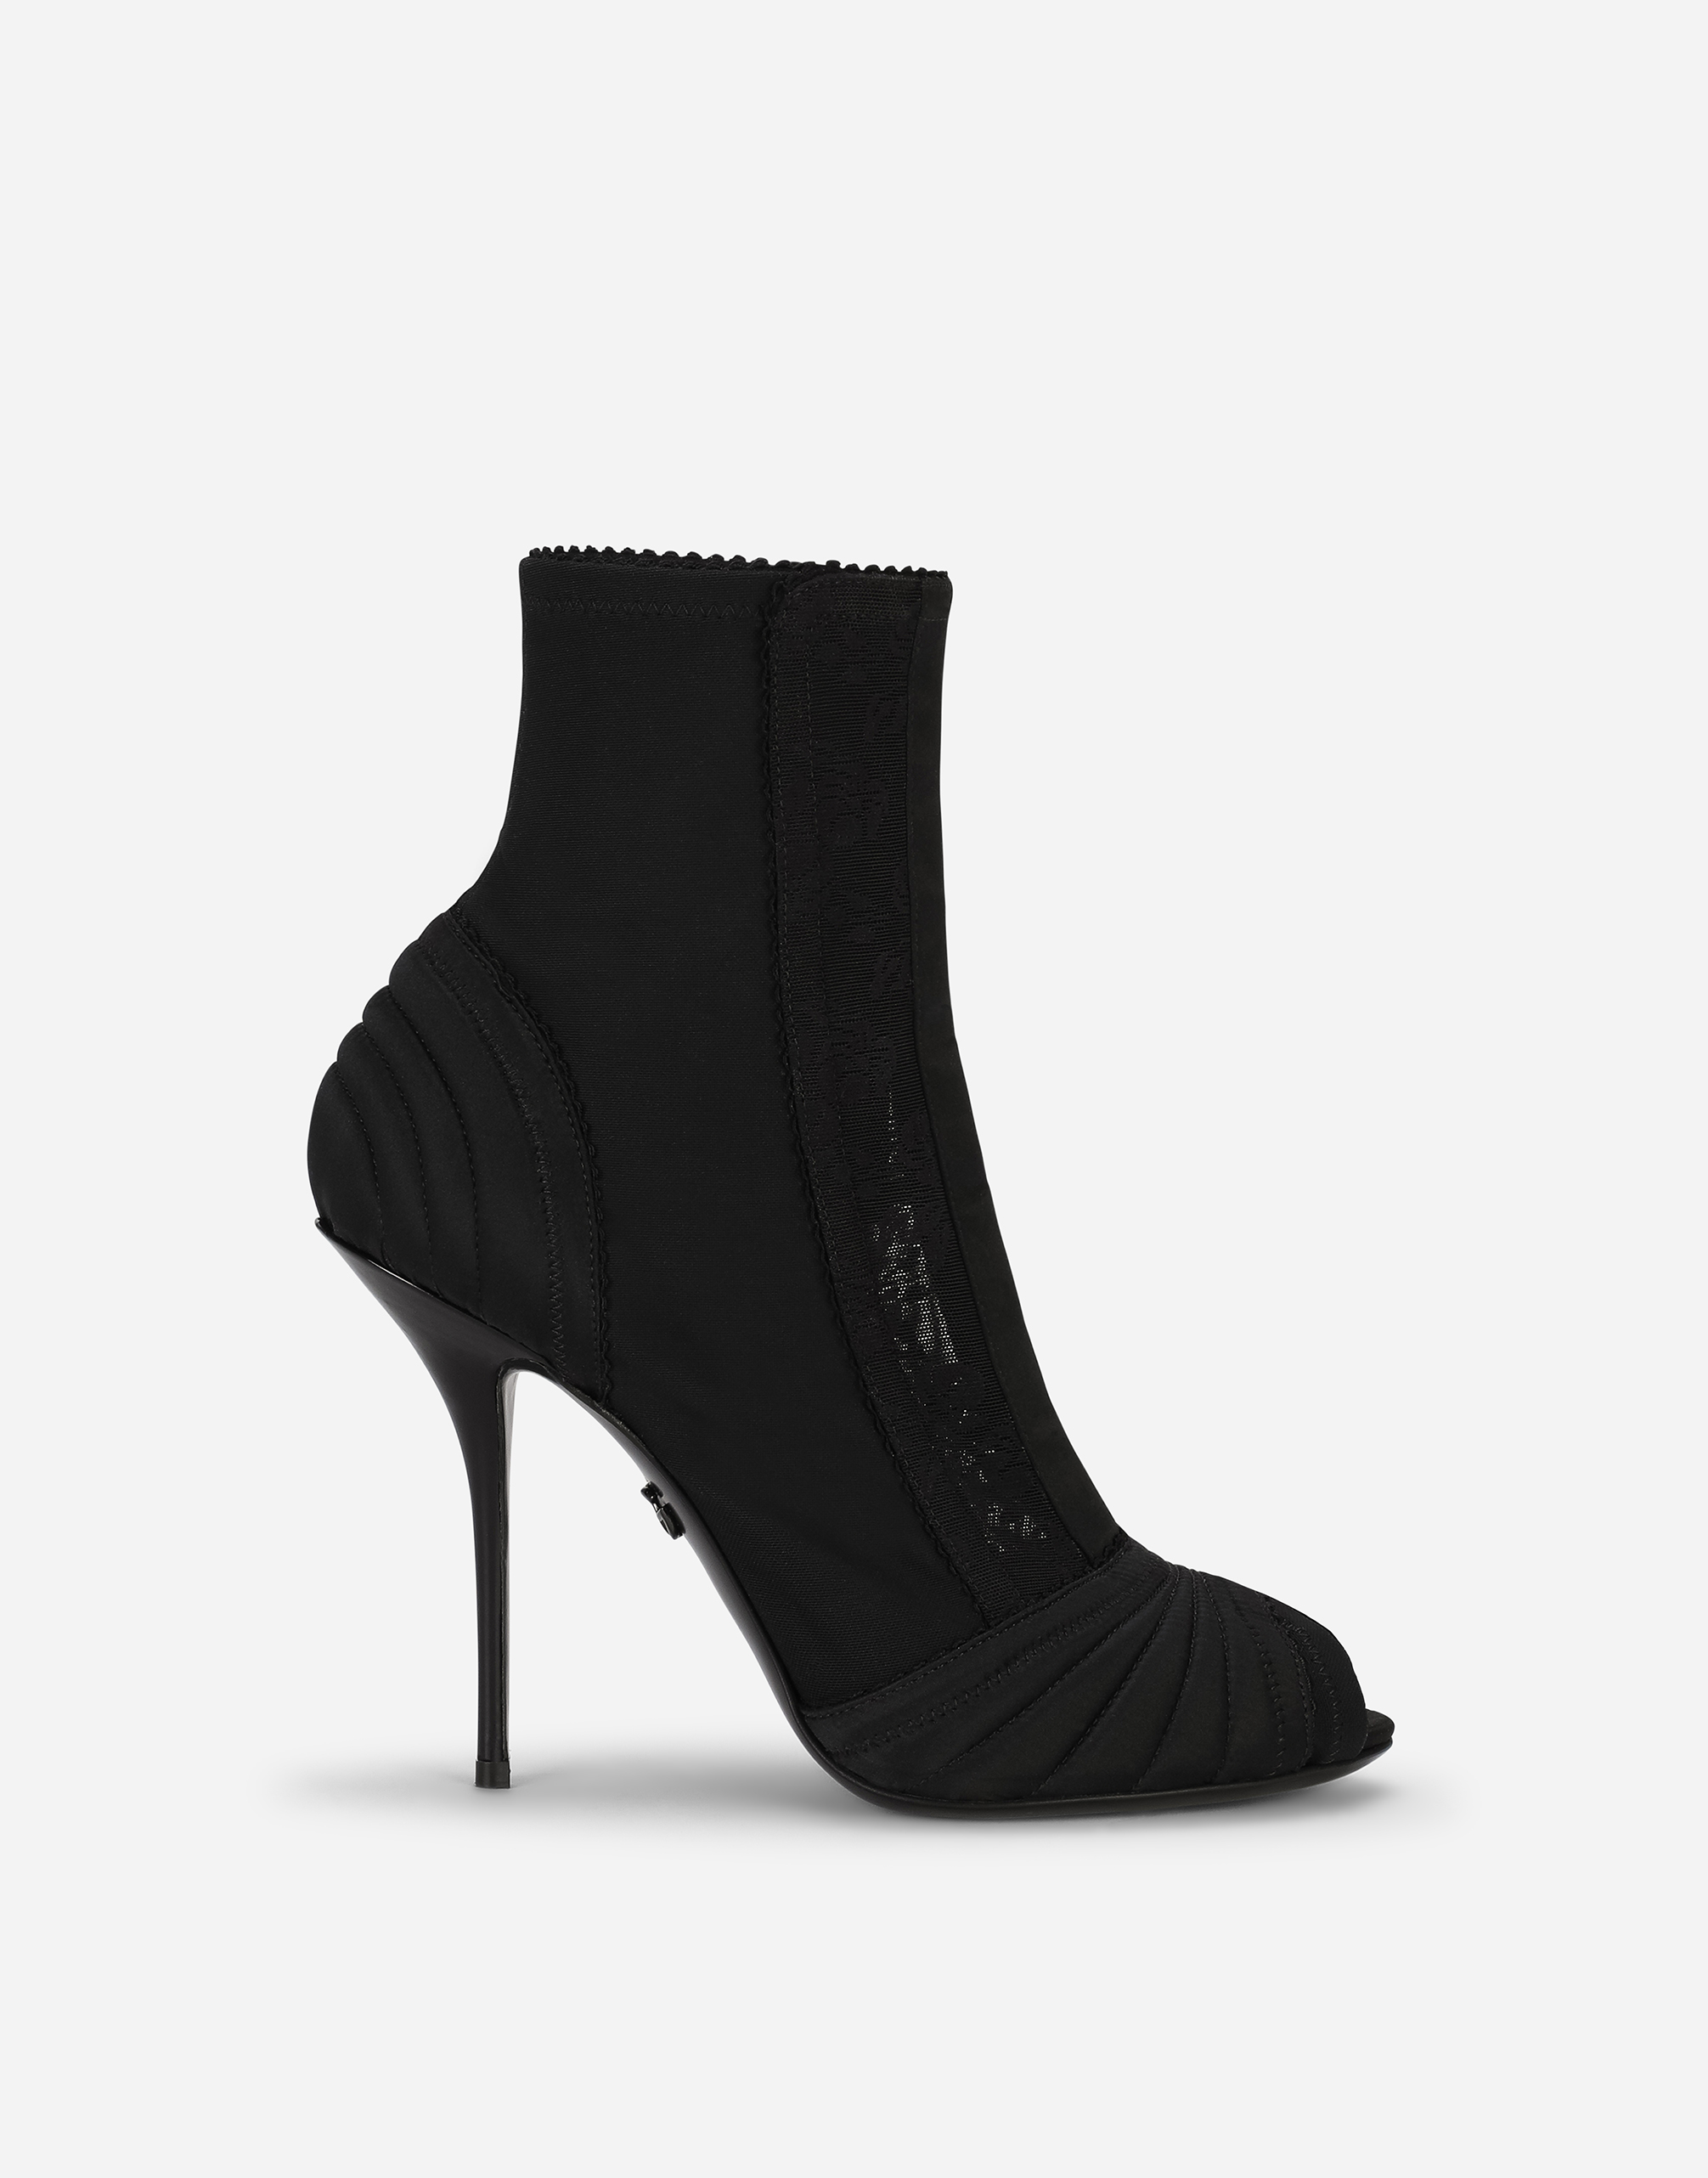 Peep-toe satin ankle boots in Black